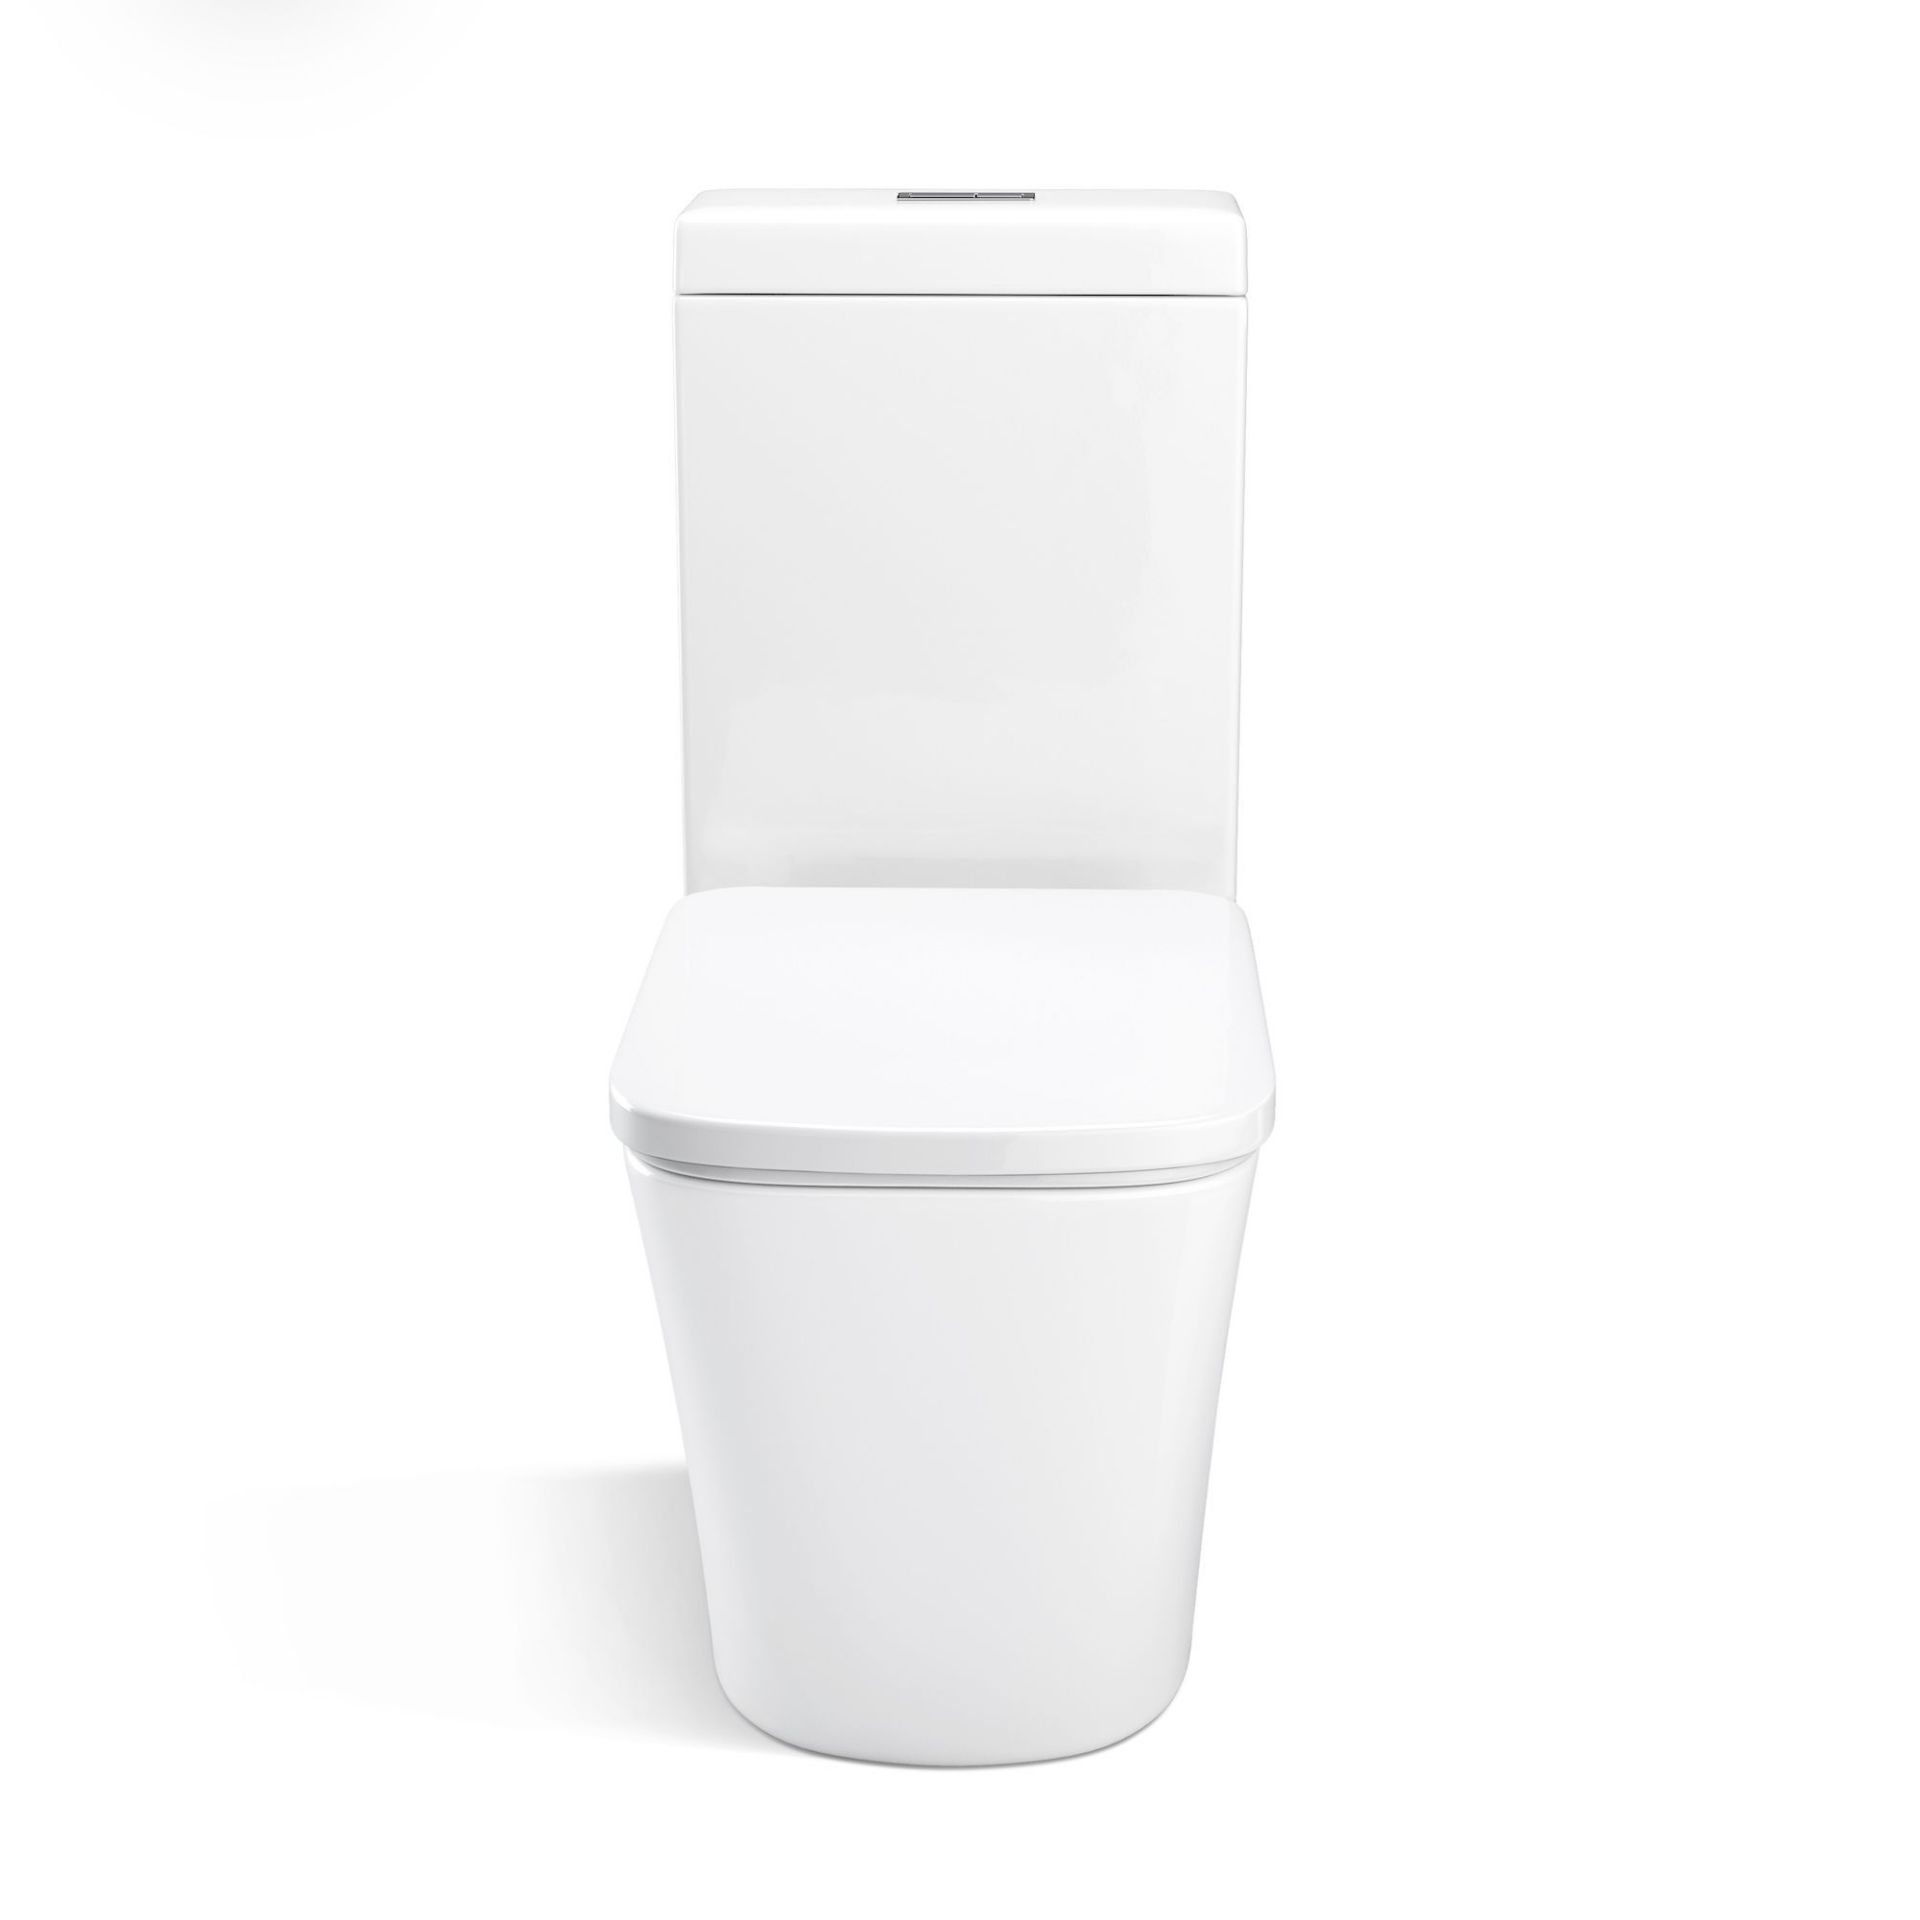 (XM83) Florence Close Coupled Toilet & Cistern inc Soft Close Seat Contemporary design finished in a - Image 2 of 4